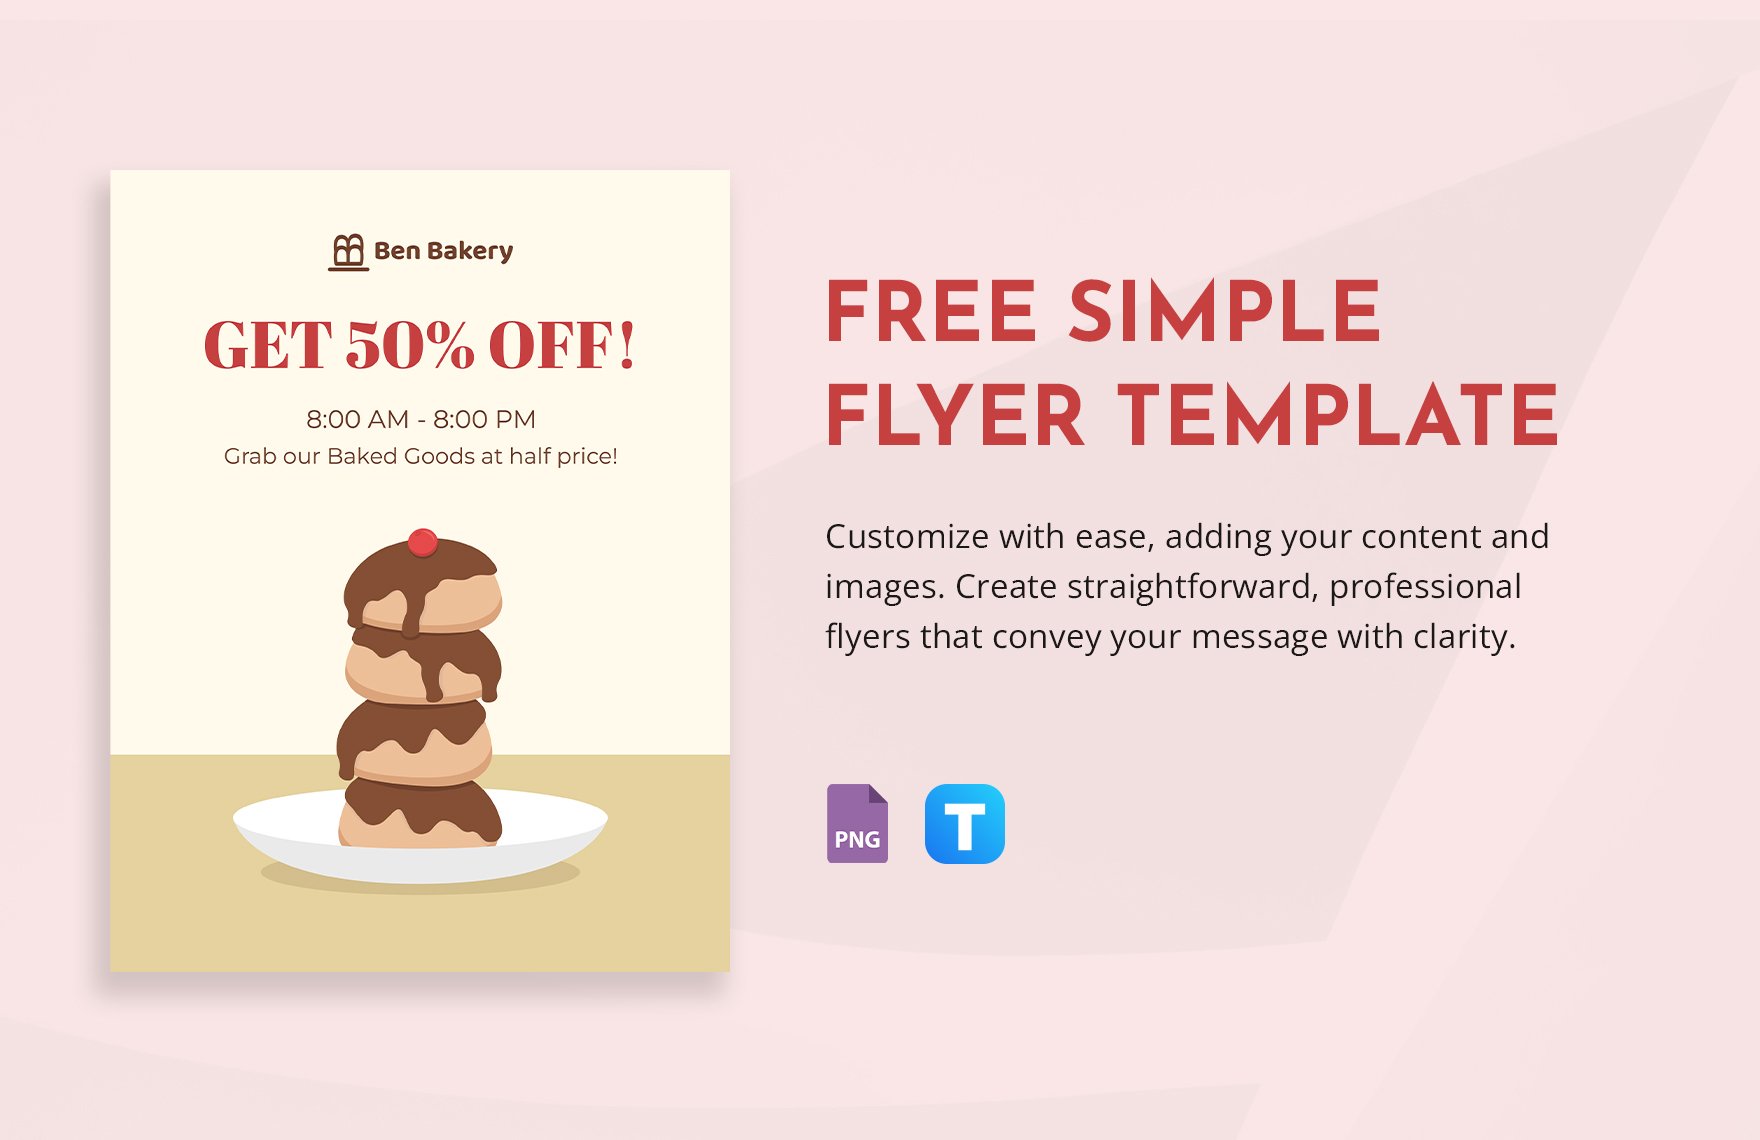 Free Simple Flyer Template in Word, PNG